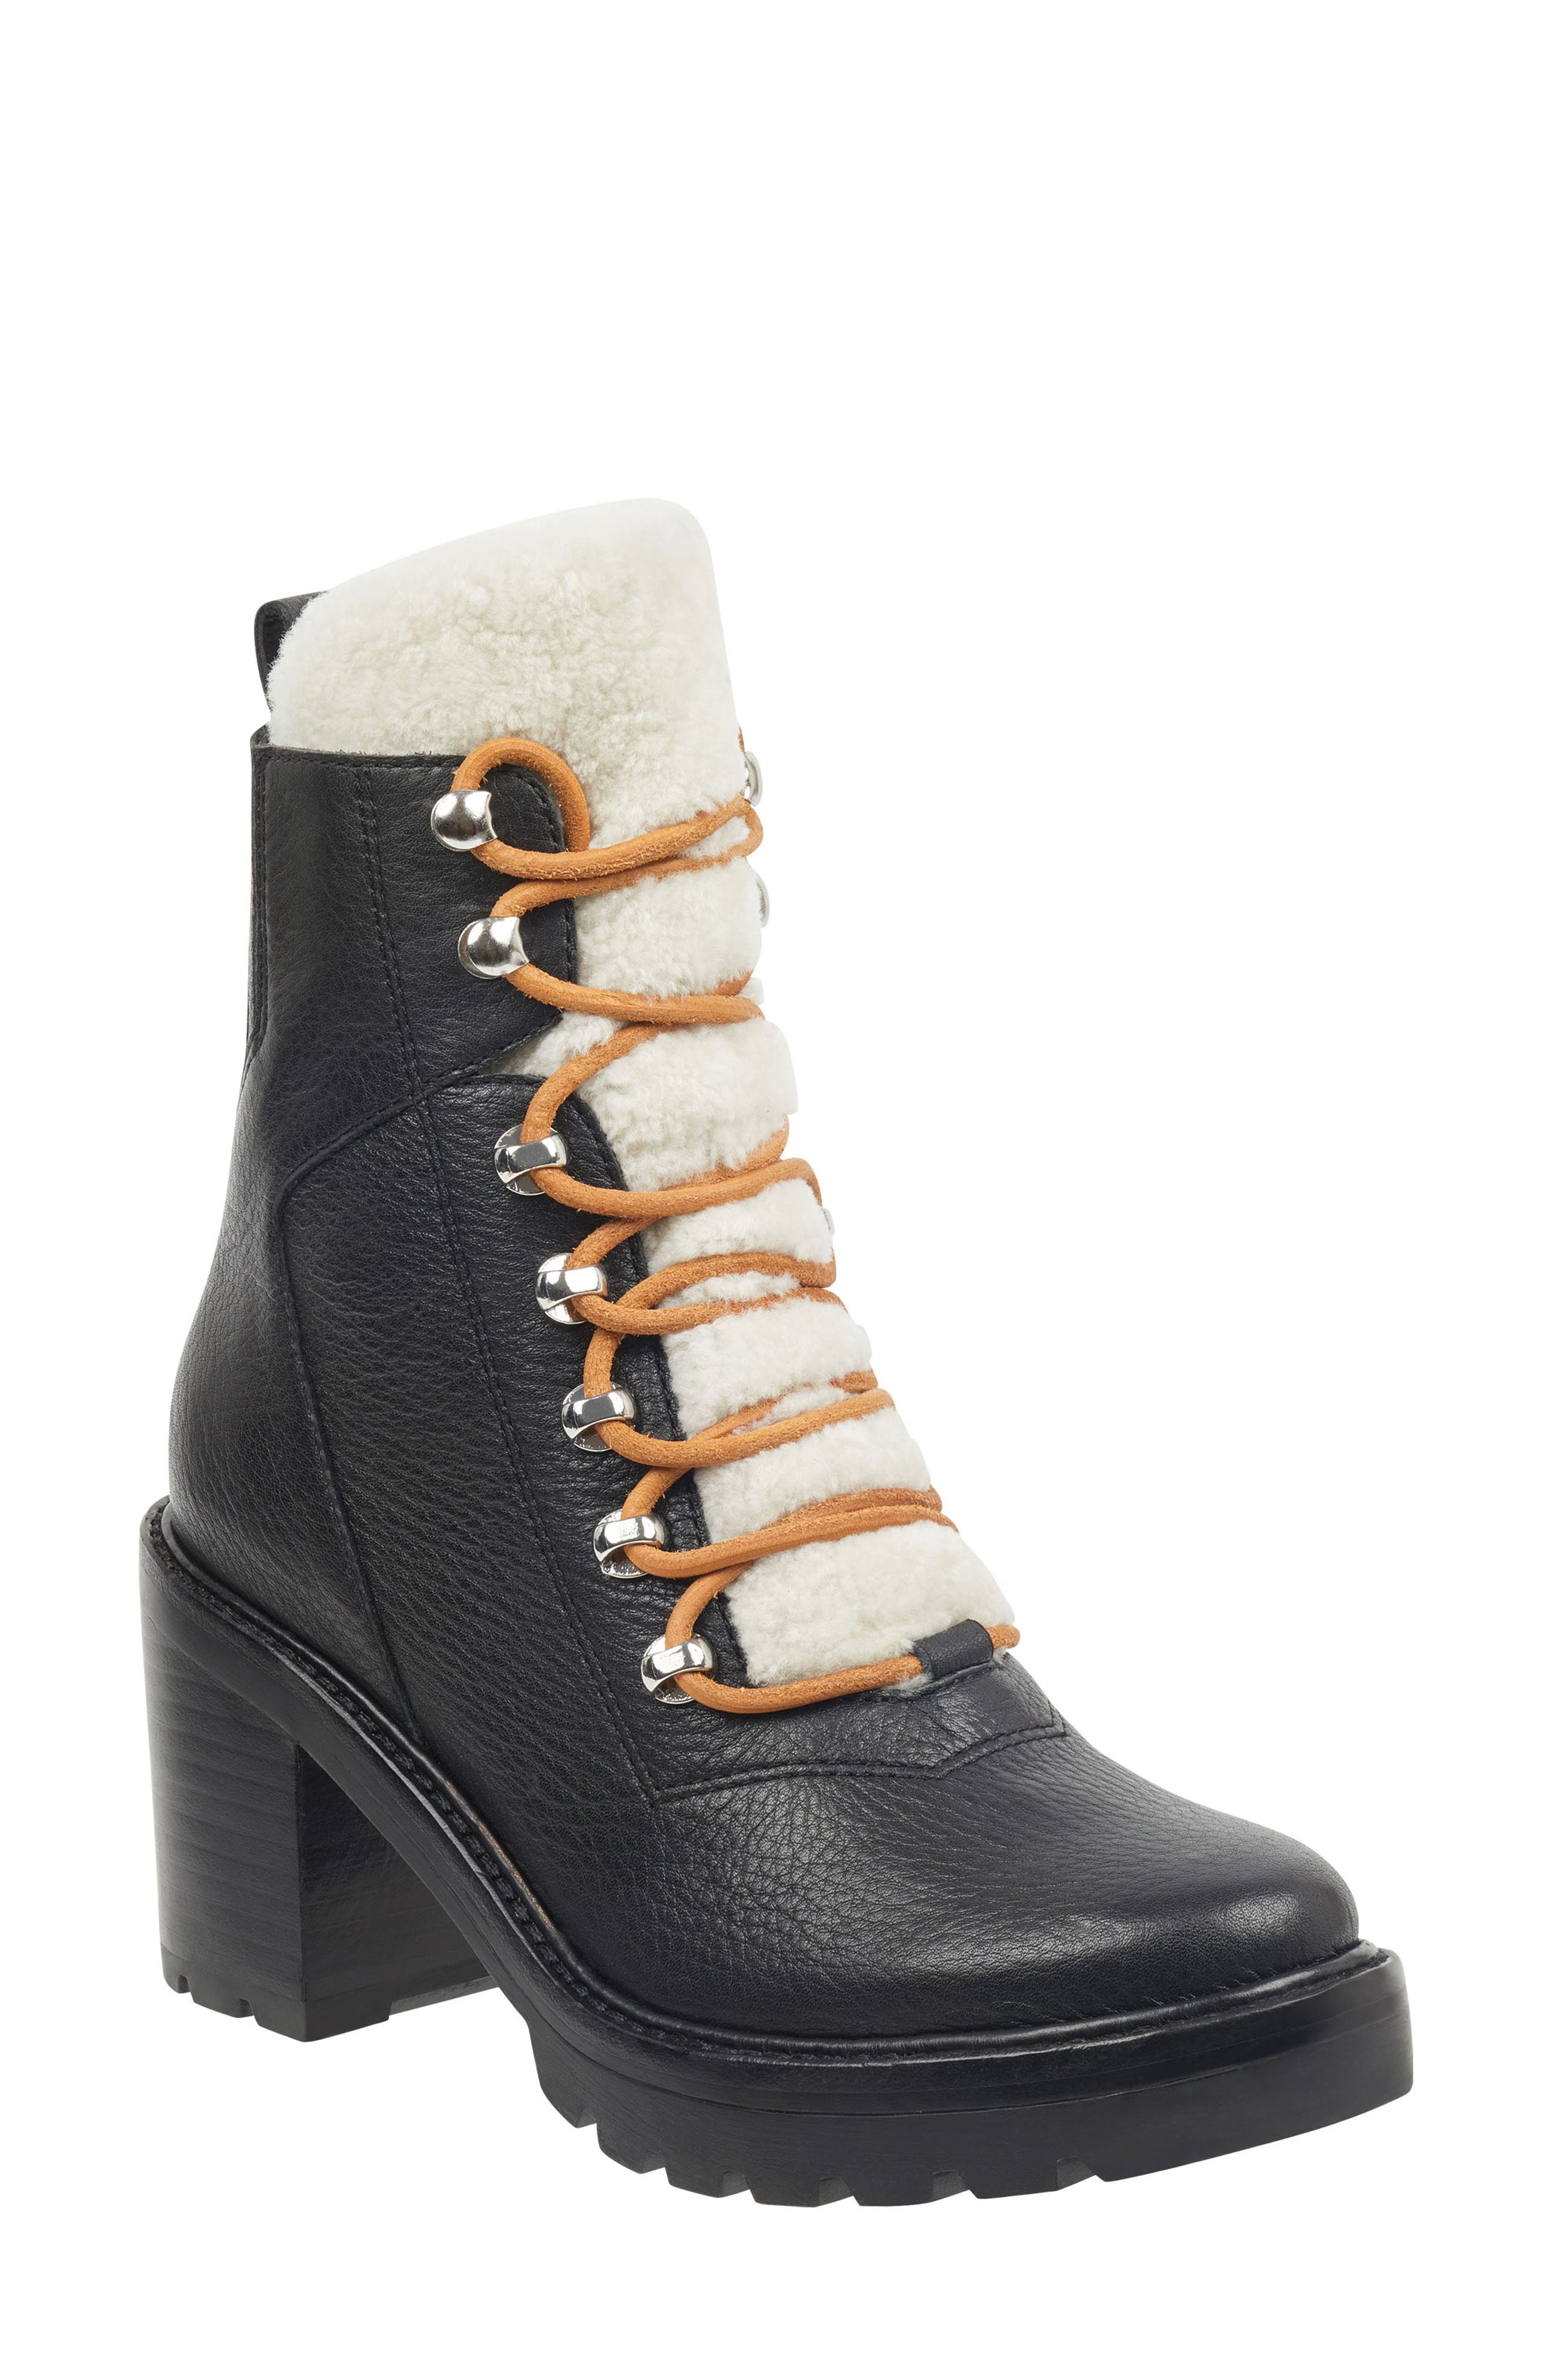 marc fisher lace up booties